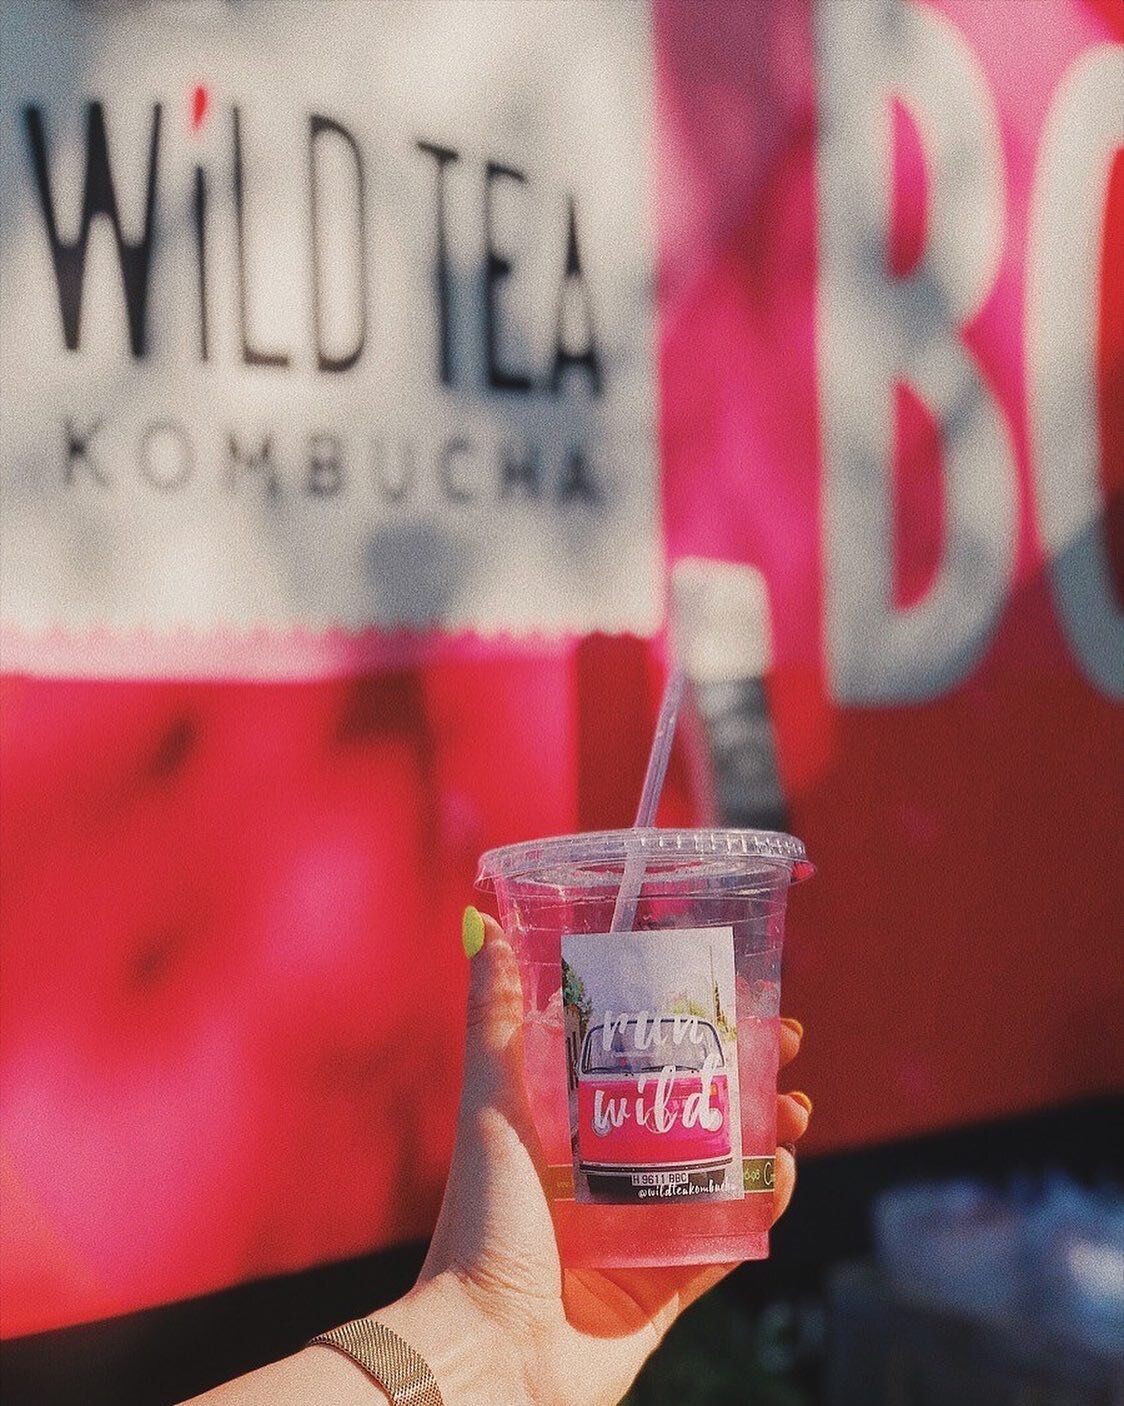 We&rsquo;re serving up cold &lsquo;buch all weekend long Calgary, at the coolest FREE stampede event hosted by our pals @neofinancial.🤠

🥞Pancake breakfast each day @ 10am
🍻@cold_garden Beer Garden 11am-10pm
🍔@gretabaryyc Foodtruck 1pm
🥤WTK 1pm
